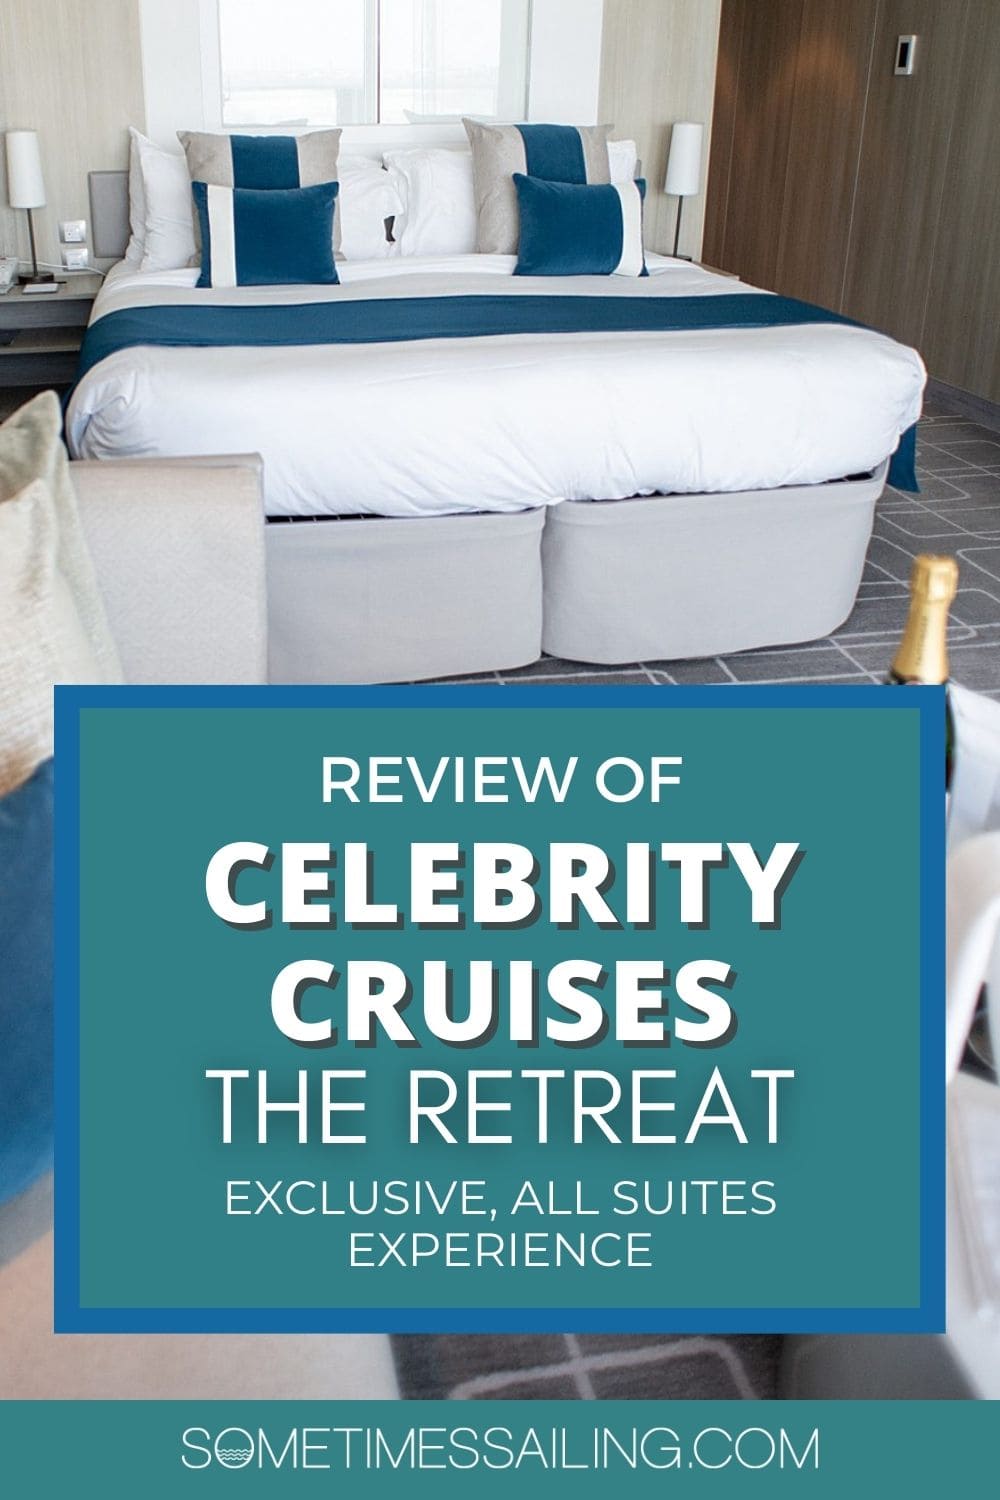 Review of Celebrity Cruises The Retreat, Exclusive All-Suites Experience, with a photo of a bed in a suite behind it on Celebrity Apex.